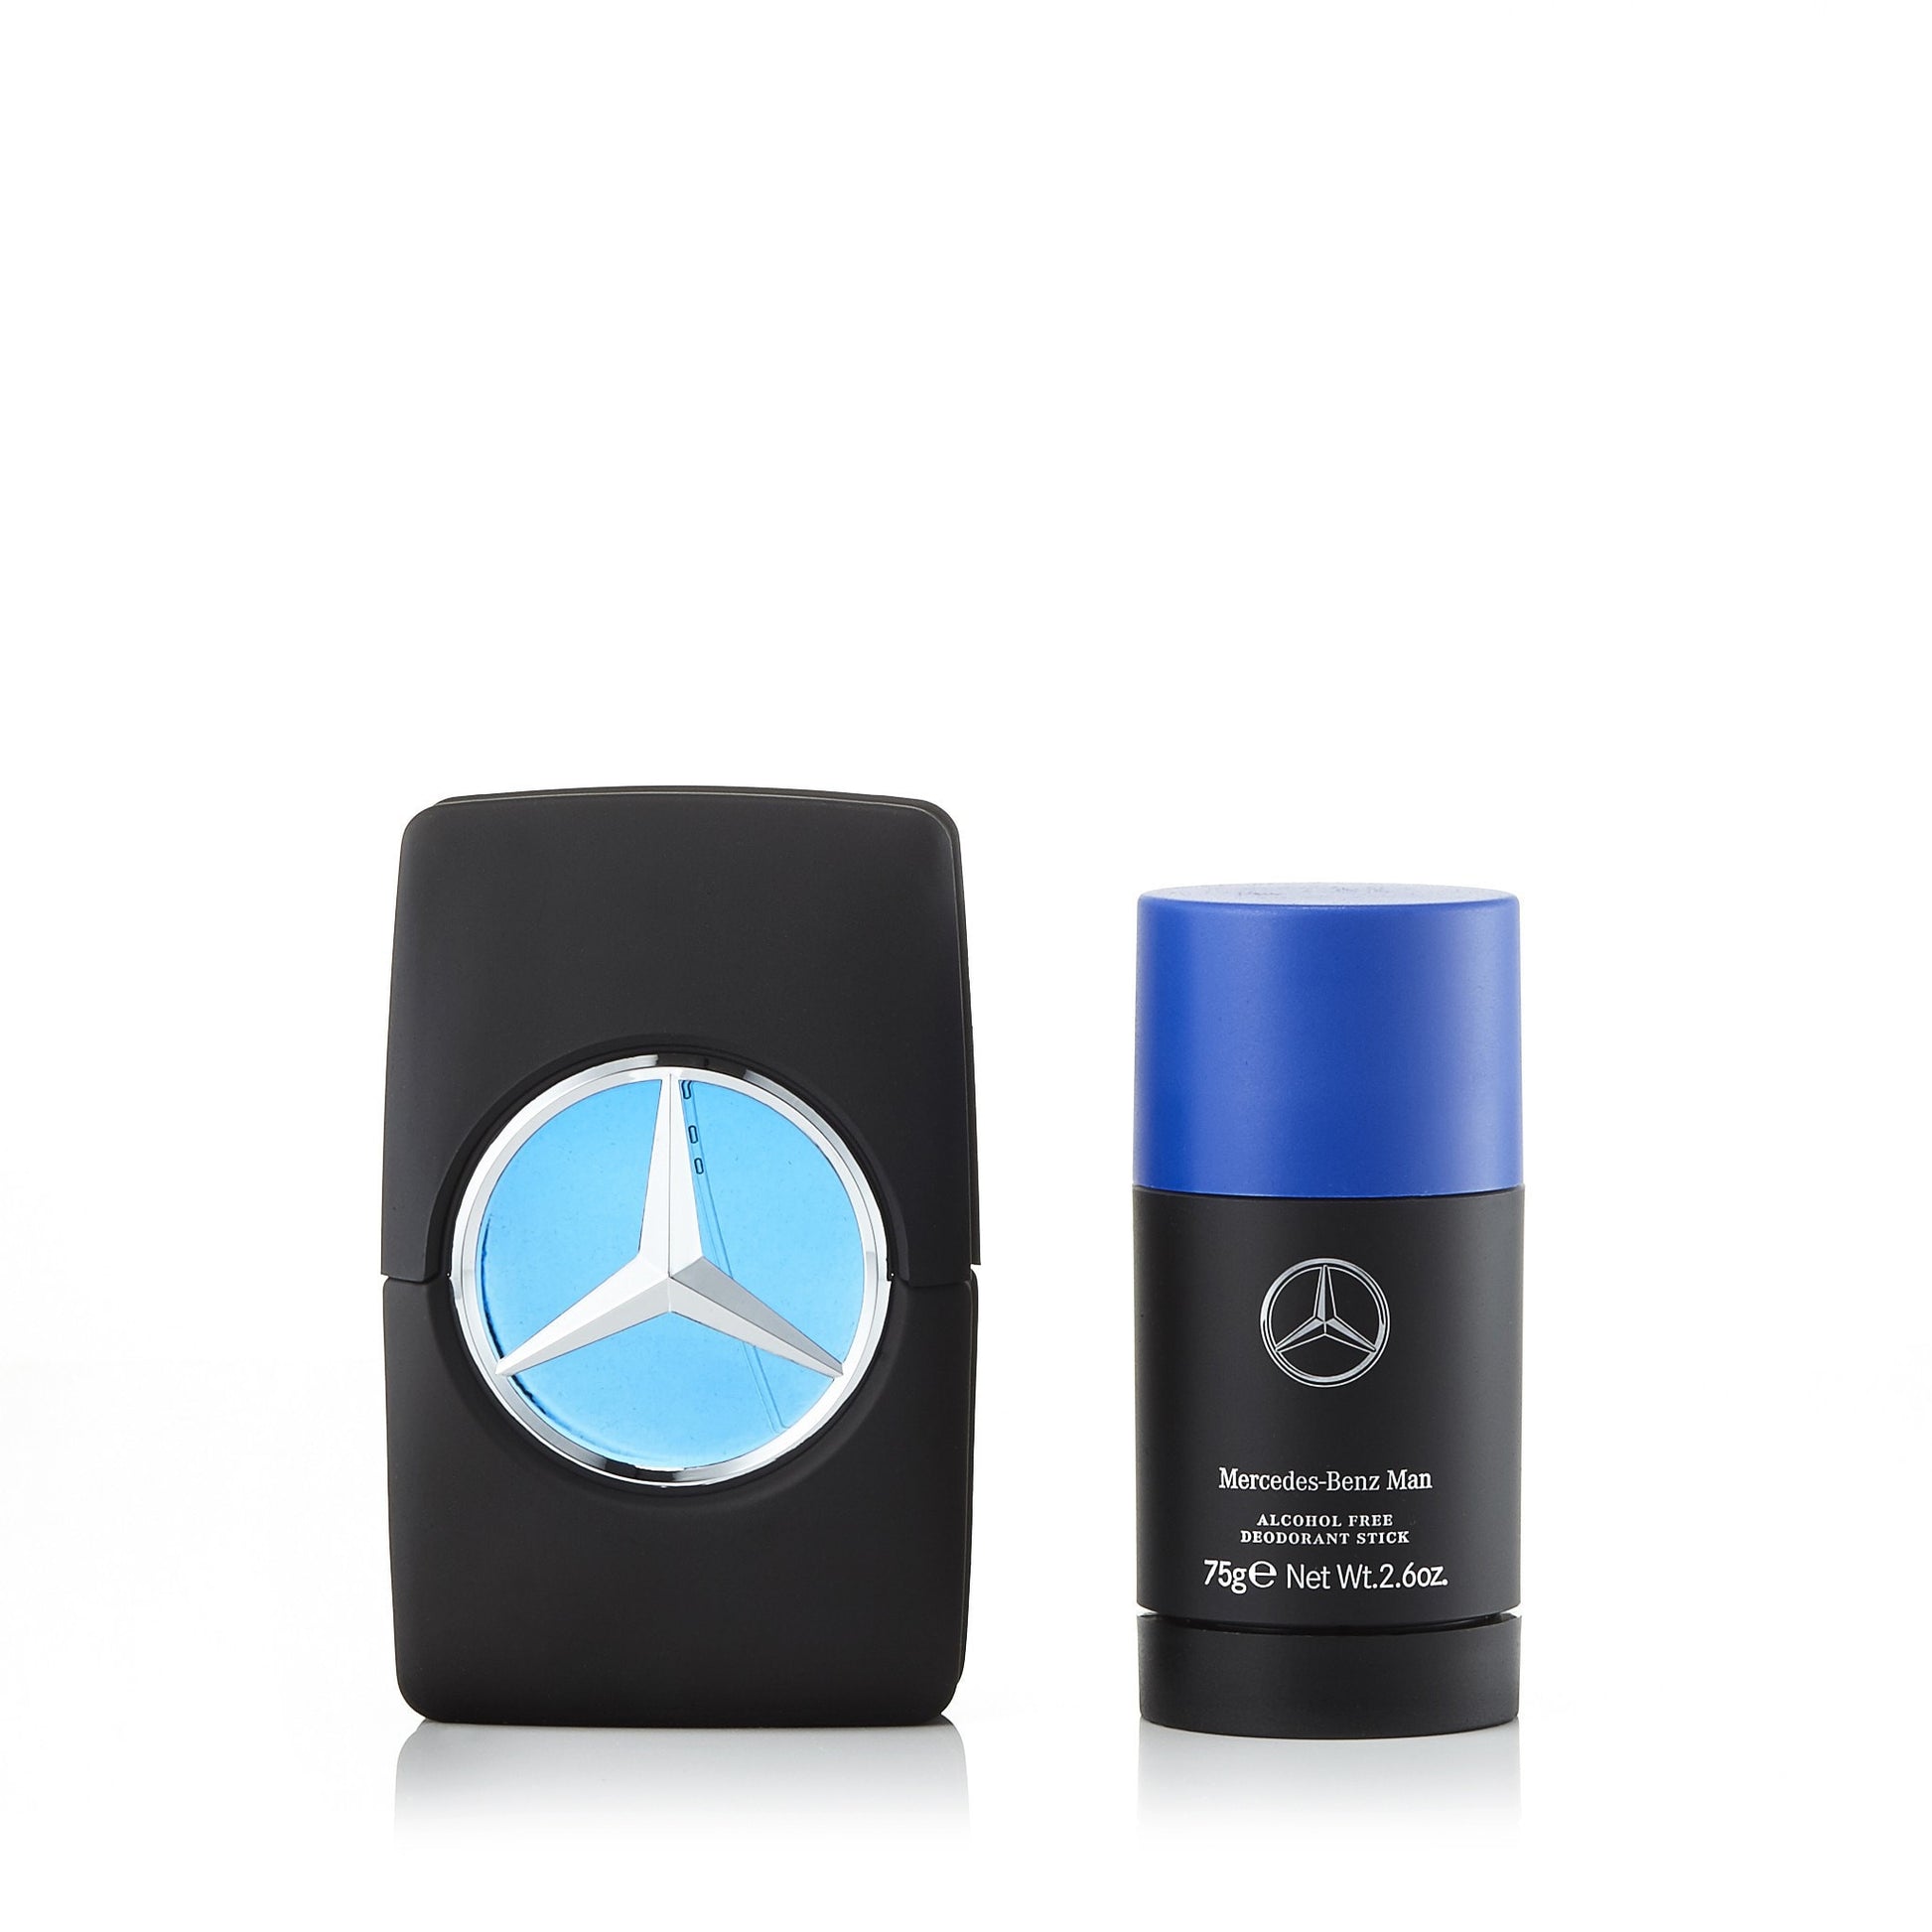 Mercedes-Benz Man Gift Set for Men by Mercedes-Benz 3.4 oz. Click to open in modal